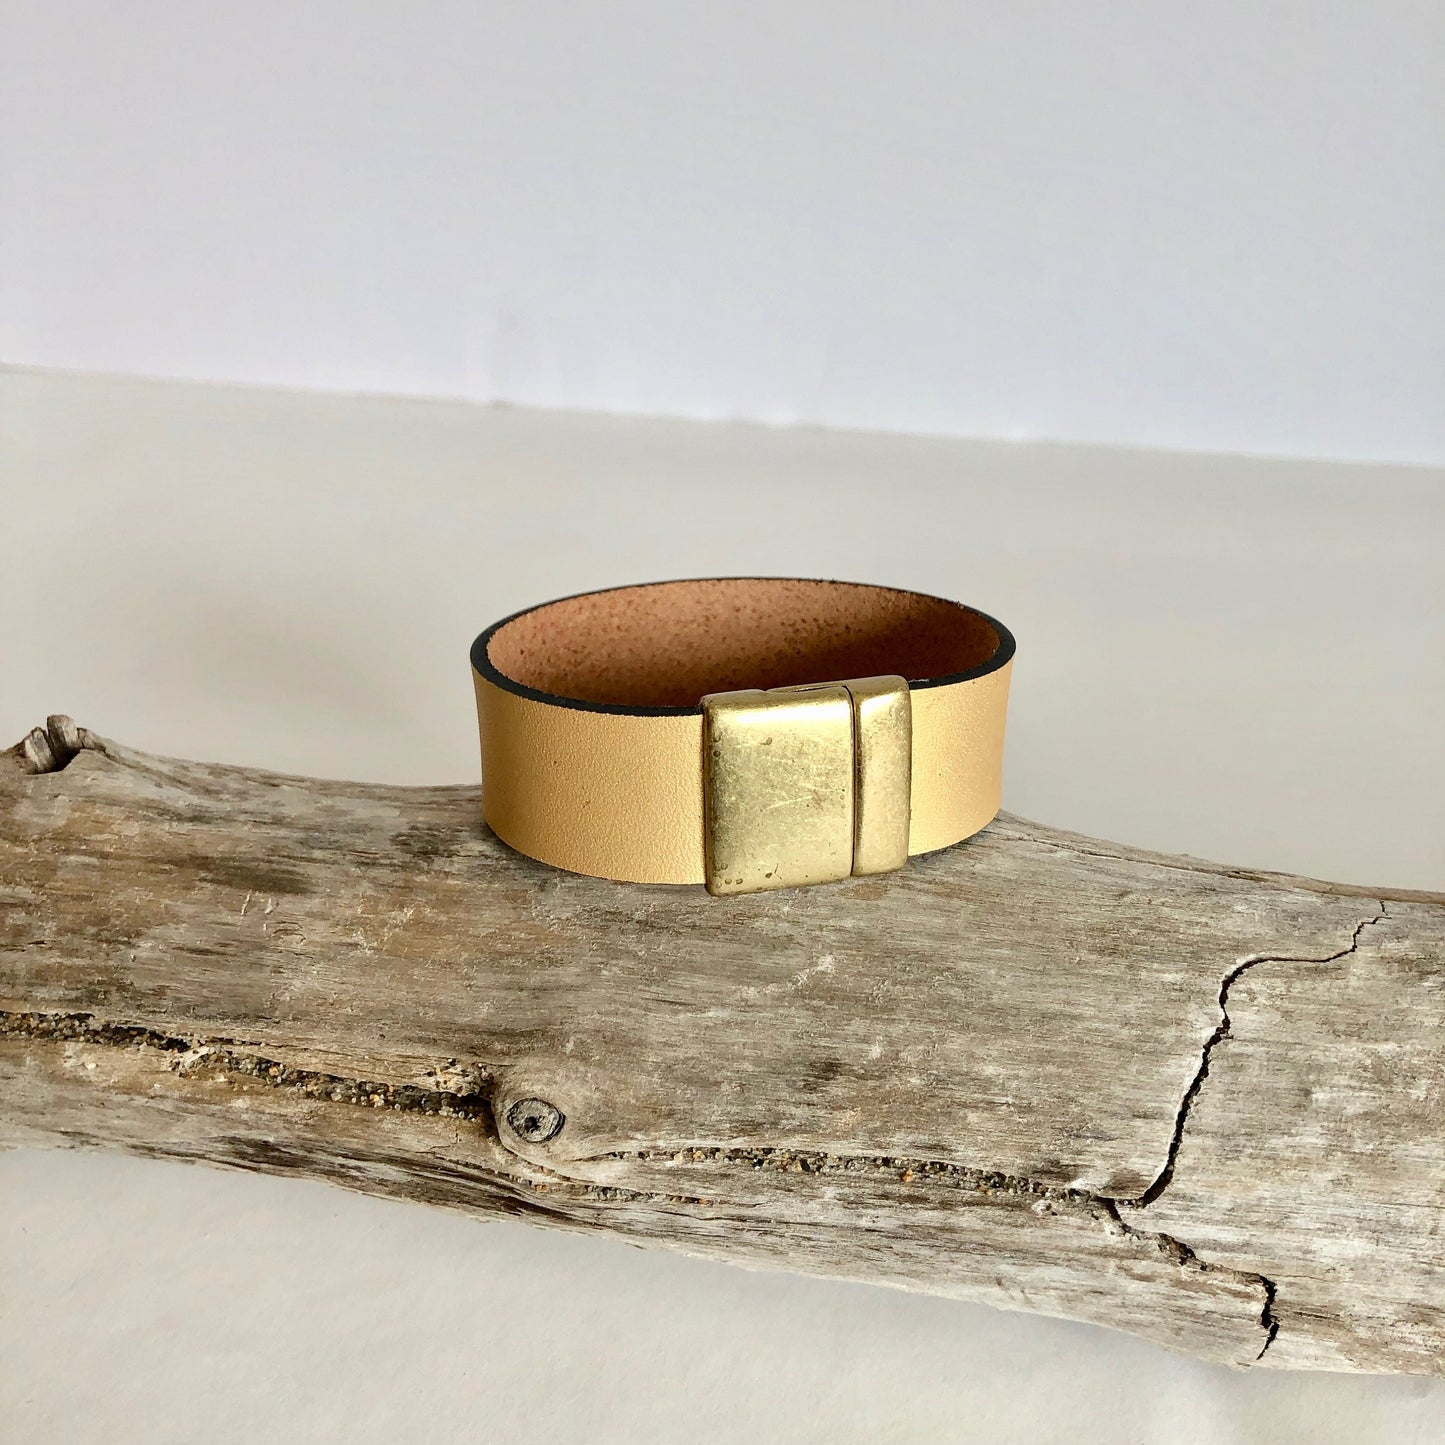 Leather bracelet, made with beautiful gold  Italian leather, and finished with a quality bronze magnetic clasp.